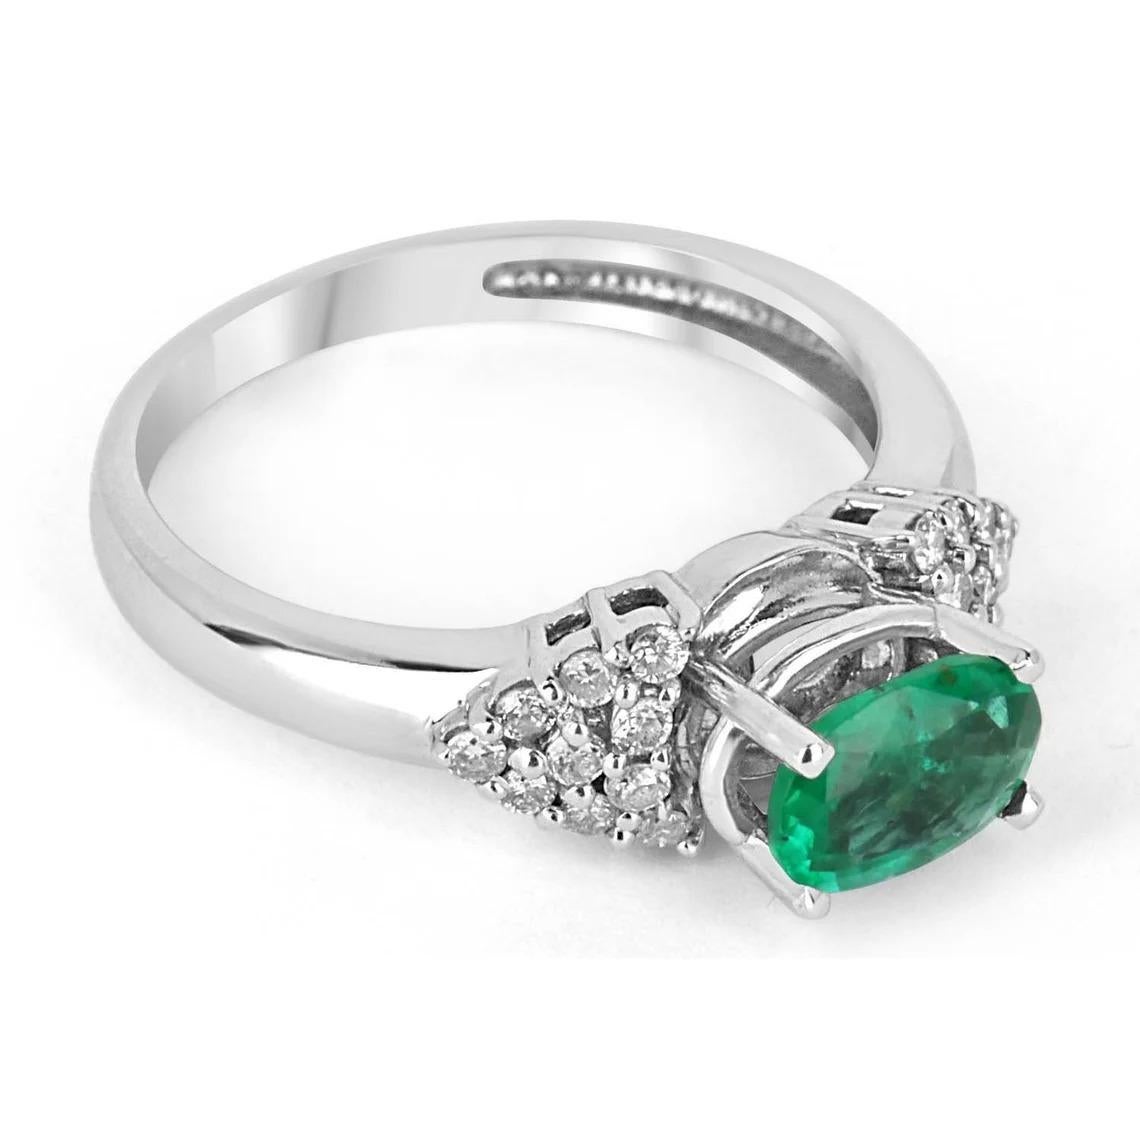 A stunning, natural Colombian emerald and diamond ring. The center stone features a 0.88-carat Colombian emerald that displays a vivacious, medium-dark green color, with excellent to very good luster. Set in a high profile, four-prong setting